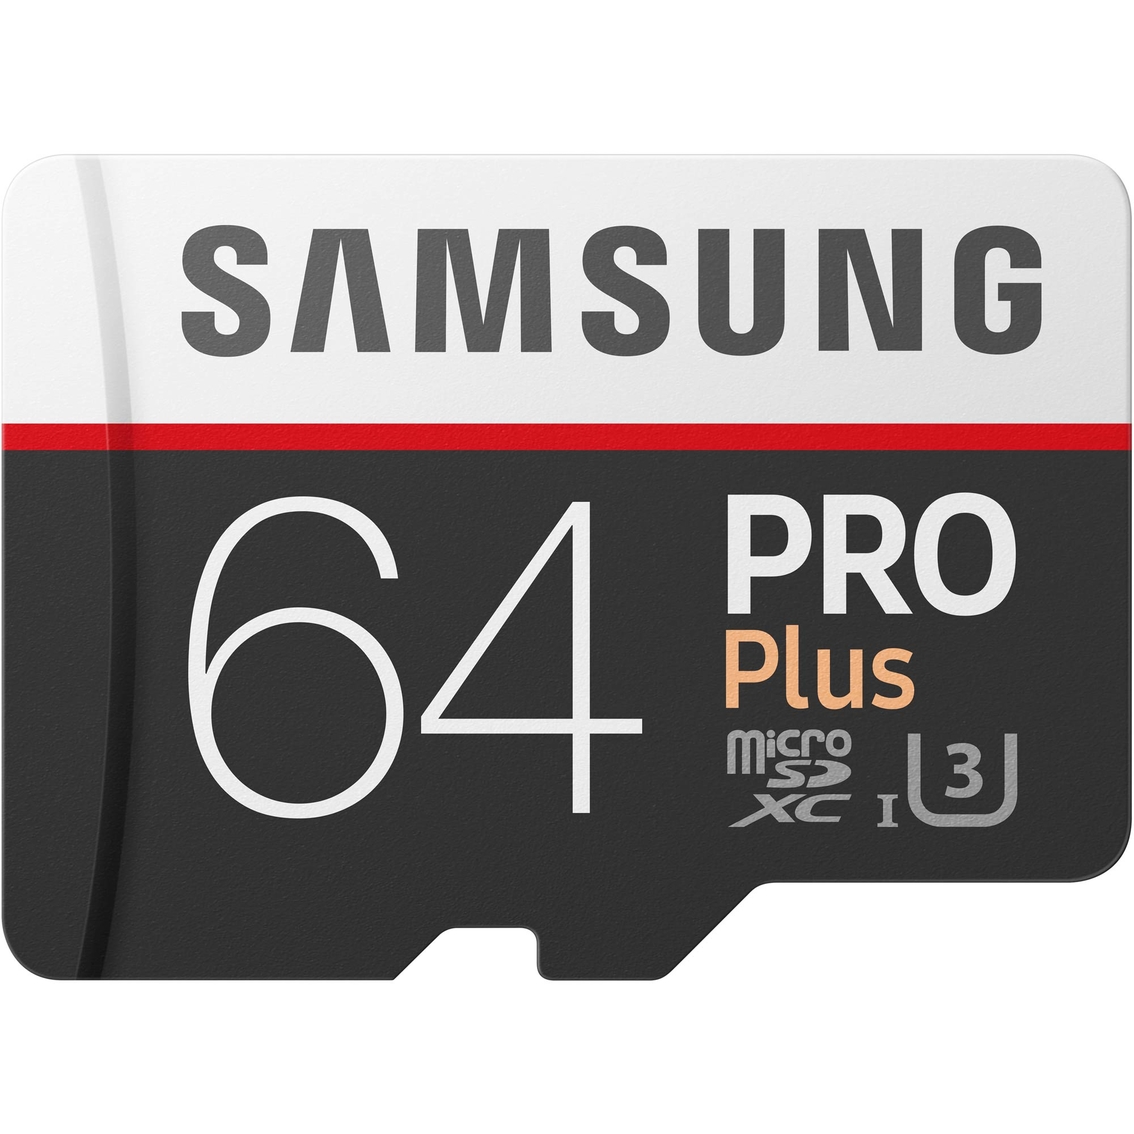 Samsung SDXC Pro+ 64GB Memory Card with SD Adapter - Image 2 of 2